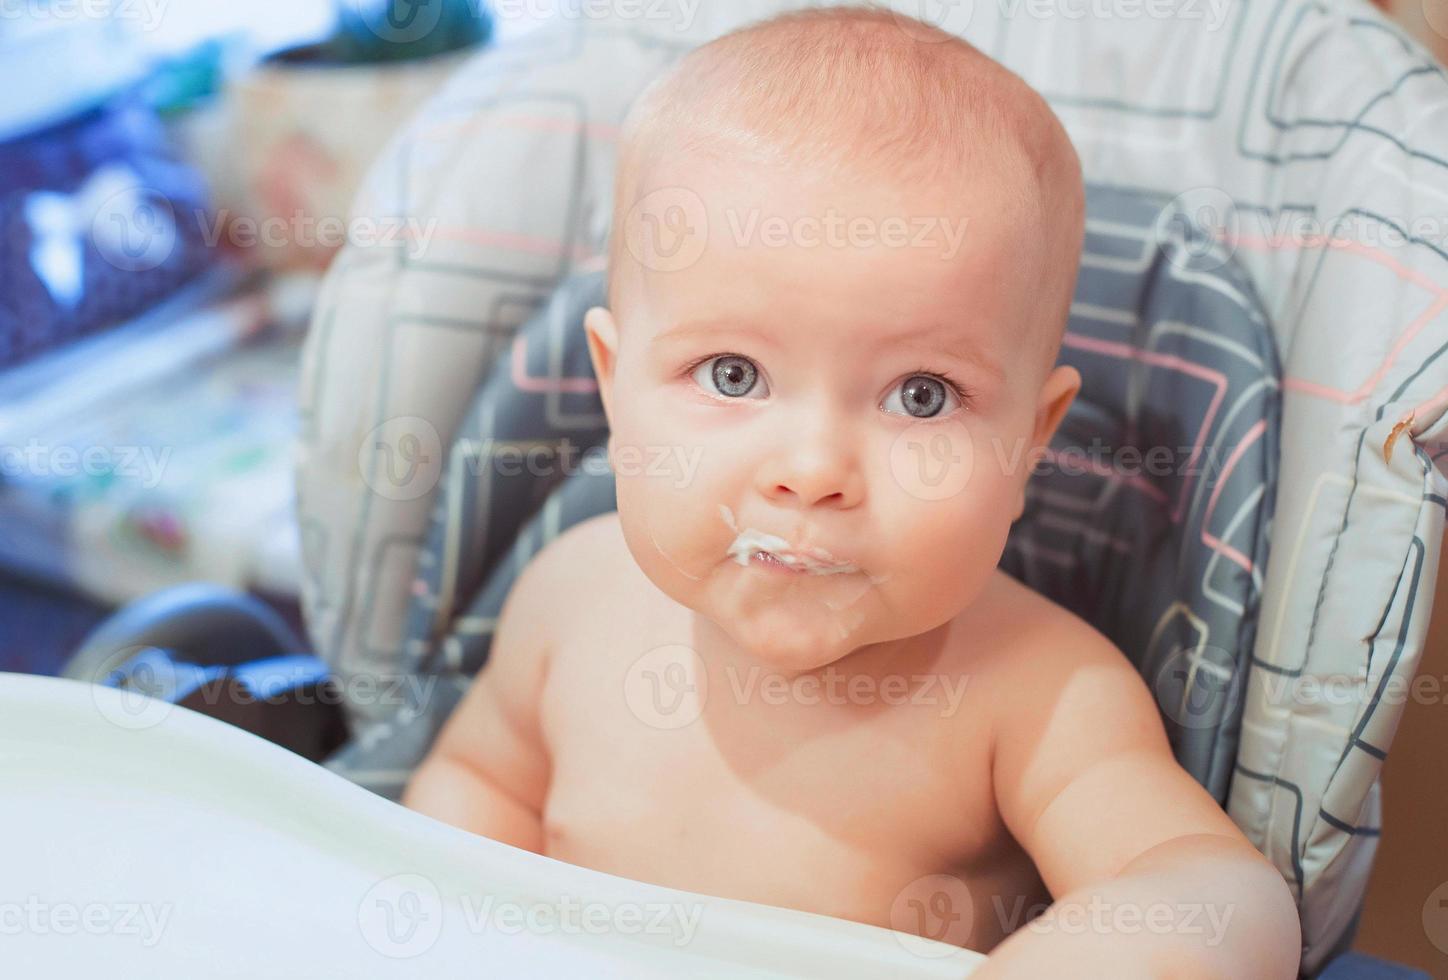 Little baby infant is eating its food. baby food, formula, baby care photo